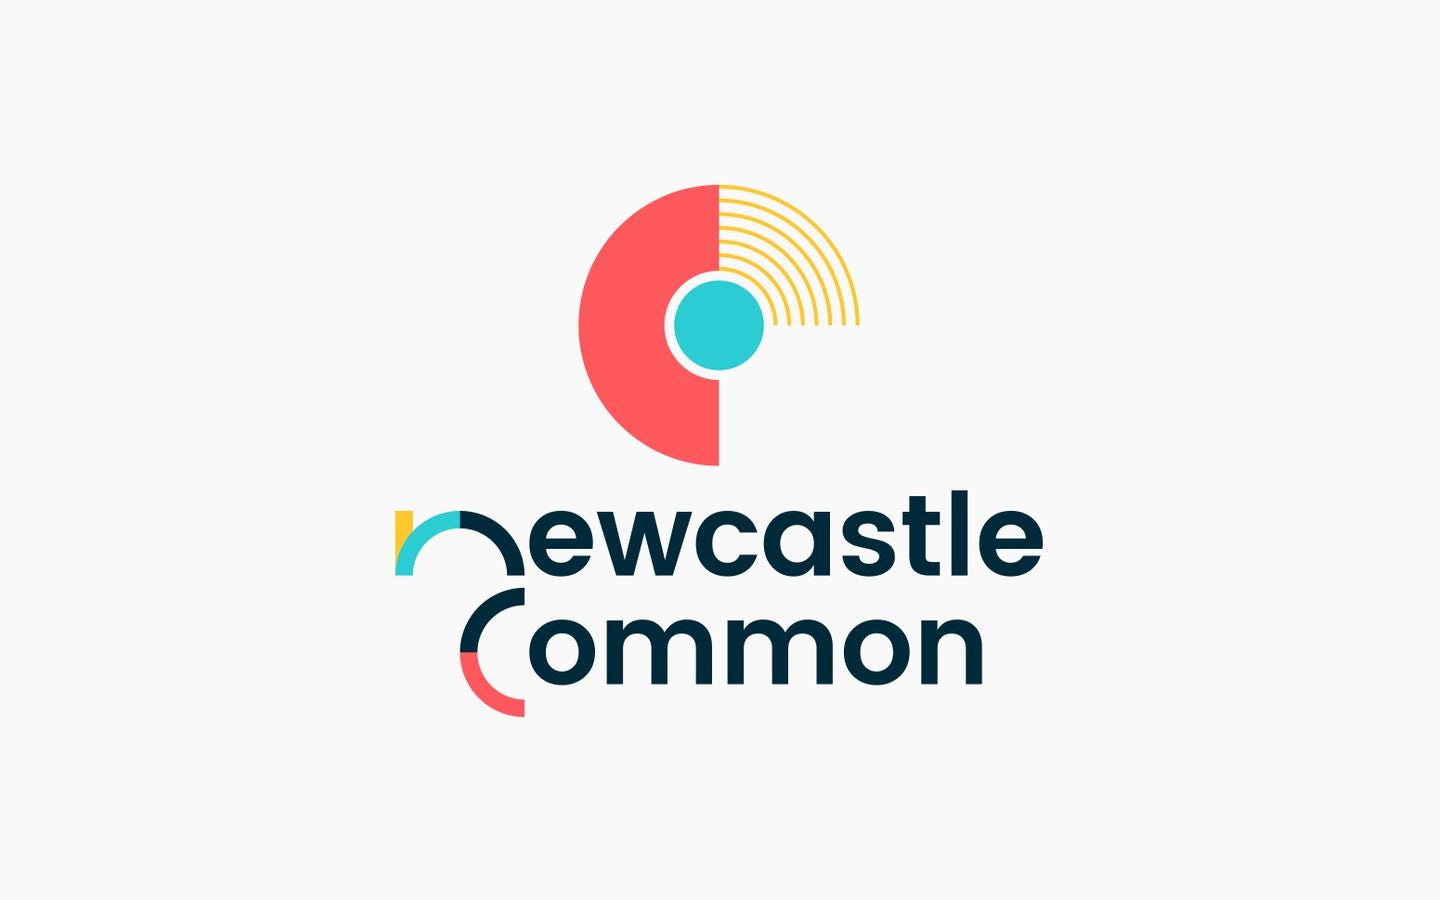 Logo of Newcastle Common, featuring a stylised letter 'N' in red and teal with a yellow sunrise pattern over a light blue circle, accompanied by the words 'Newcastle Common' in a modern sans-serif font, with 'Newcastle' in black and 'Common' in teal.